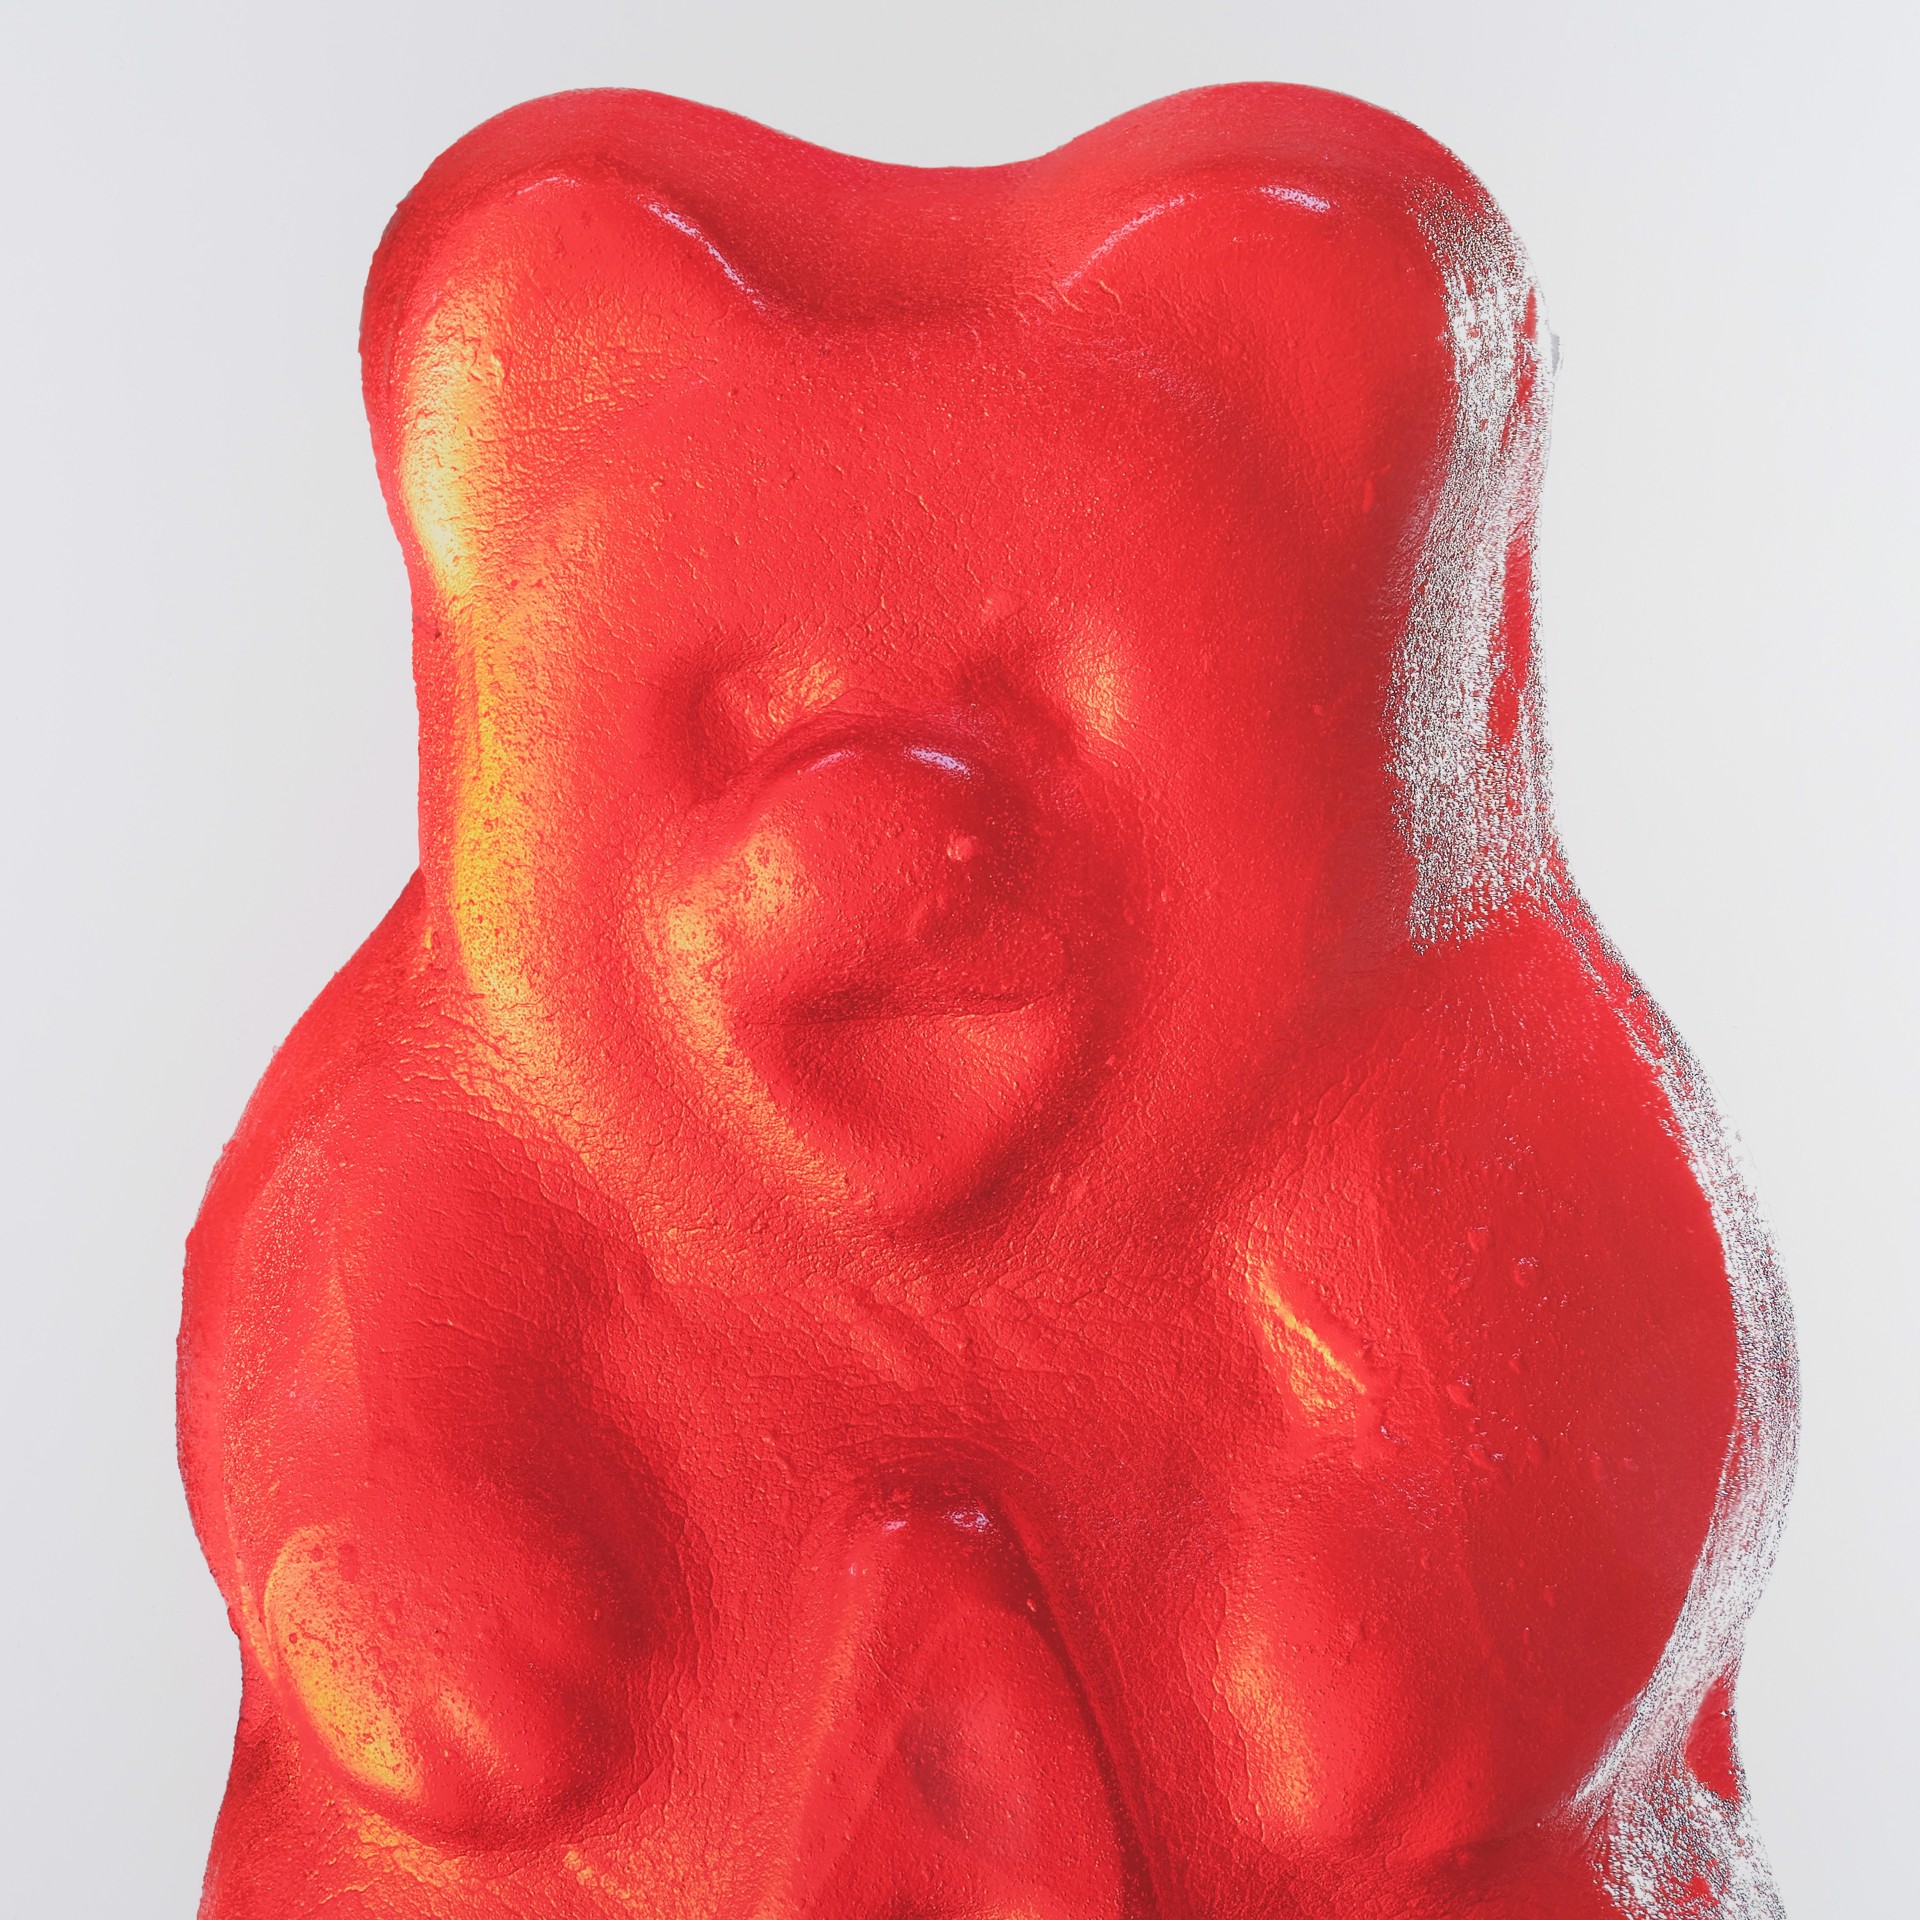 Gummy Bear - Red by Peter Andrew Lusztyk / Refined Sugar